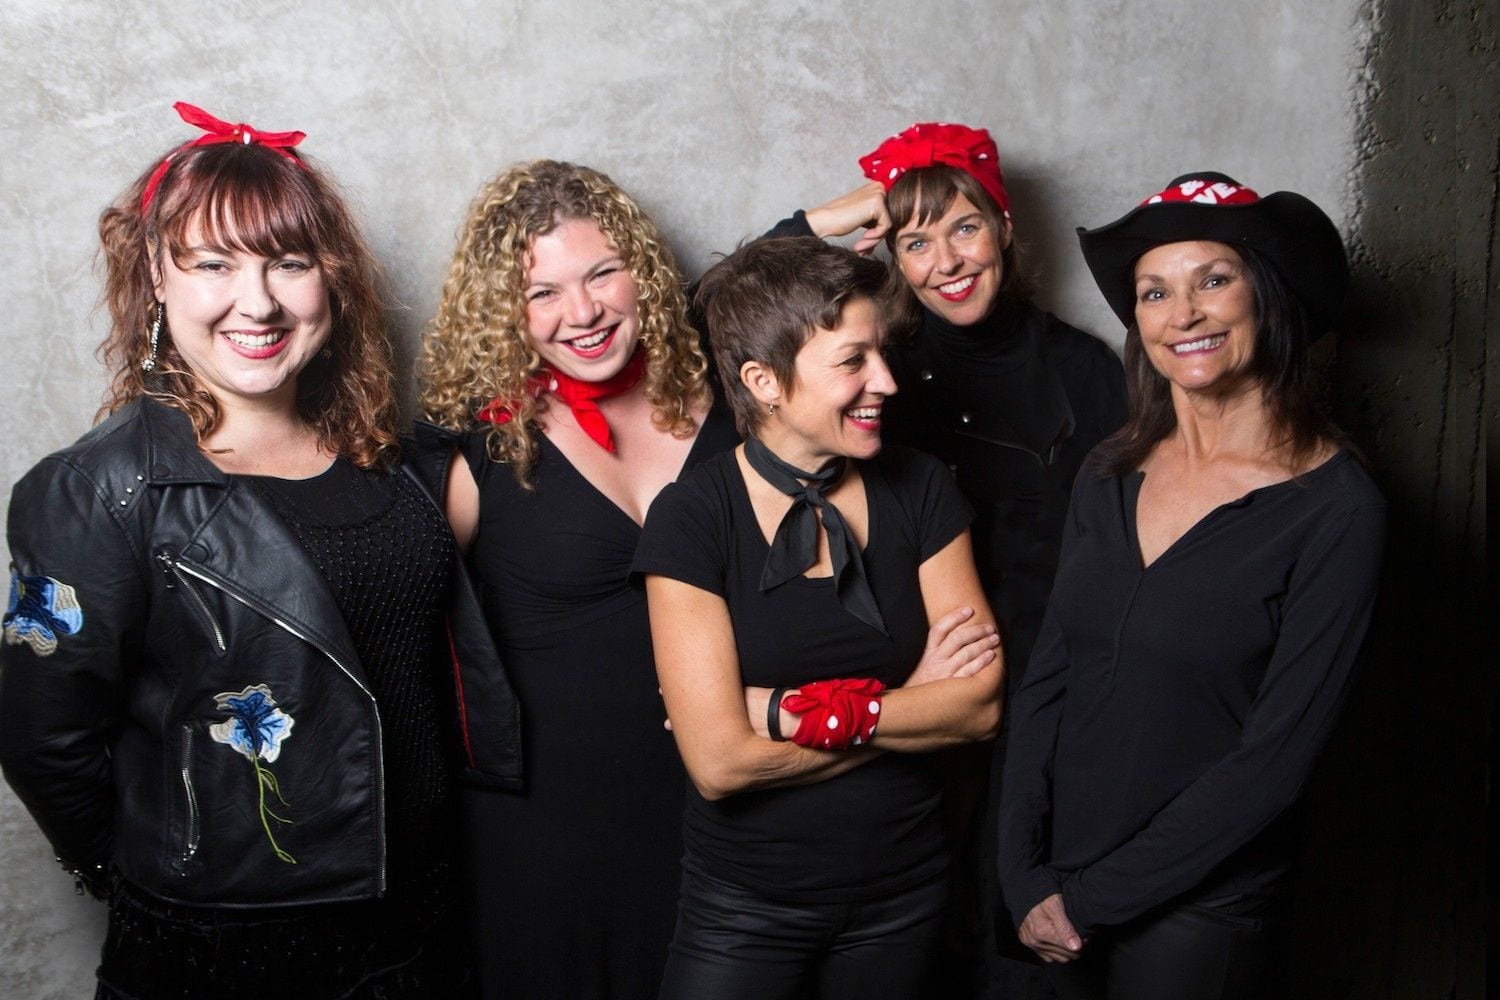 Ashleigh Flynn & the Riveters Get the Job Done With “This Love” (premiere + interview)